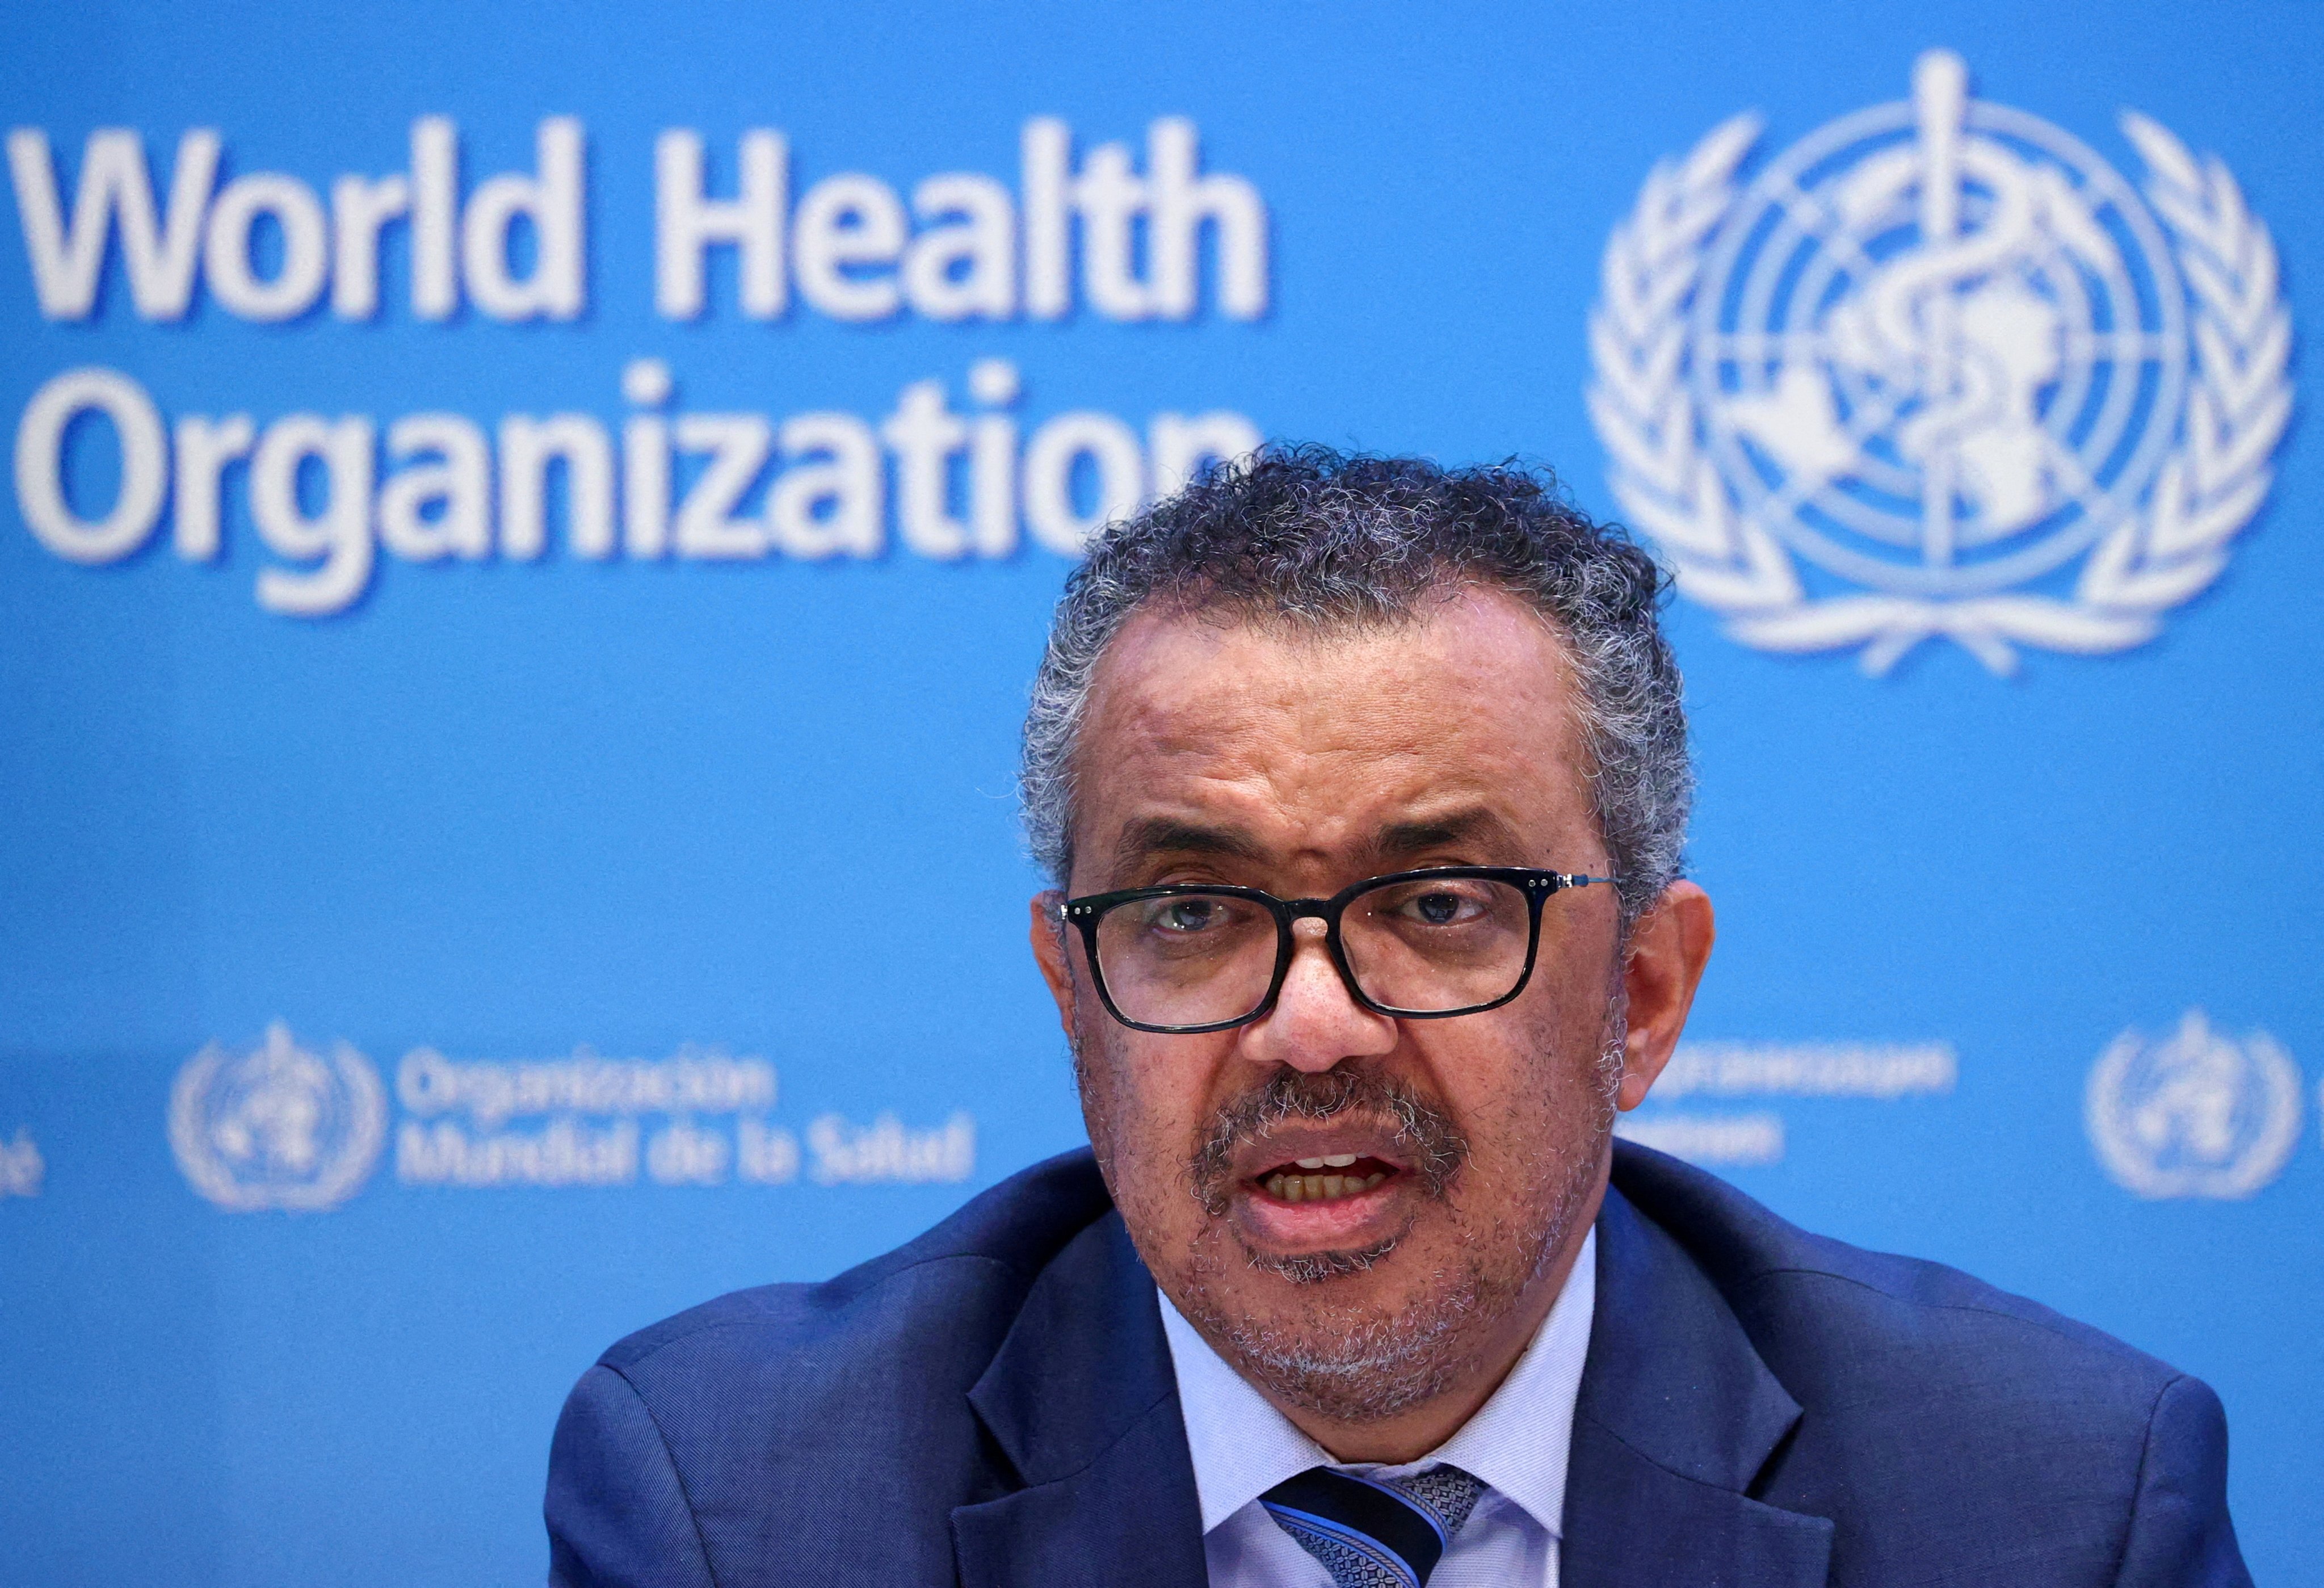 Tedros Adhanom Ghebreyesus, Director-General of the World Health Organization (WHO). He has met Commonwealth of Nations Secretary-General Patricia Scotland in Geneva to sign an agreement focused on ending the pandemic and fighting vaccine inequity. File photo: Reuters